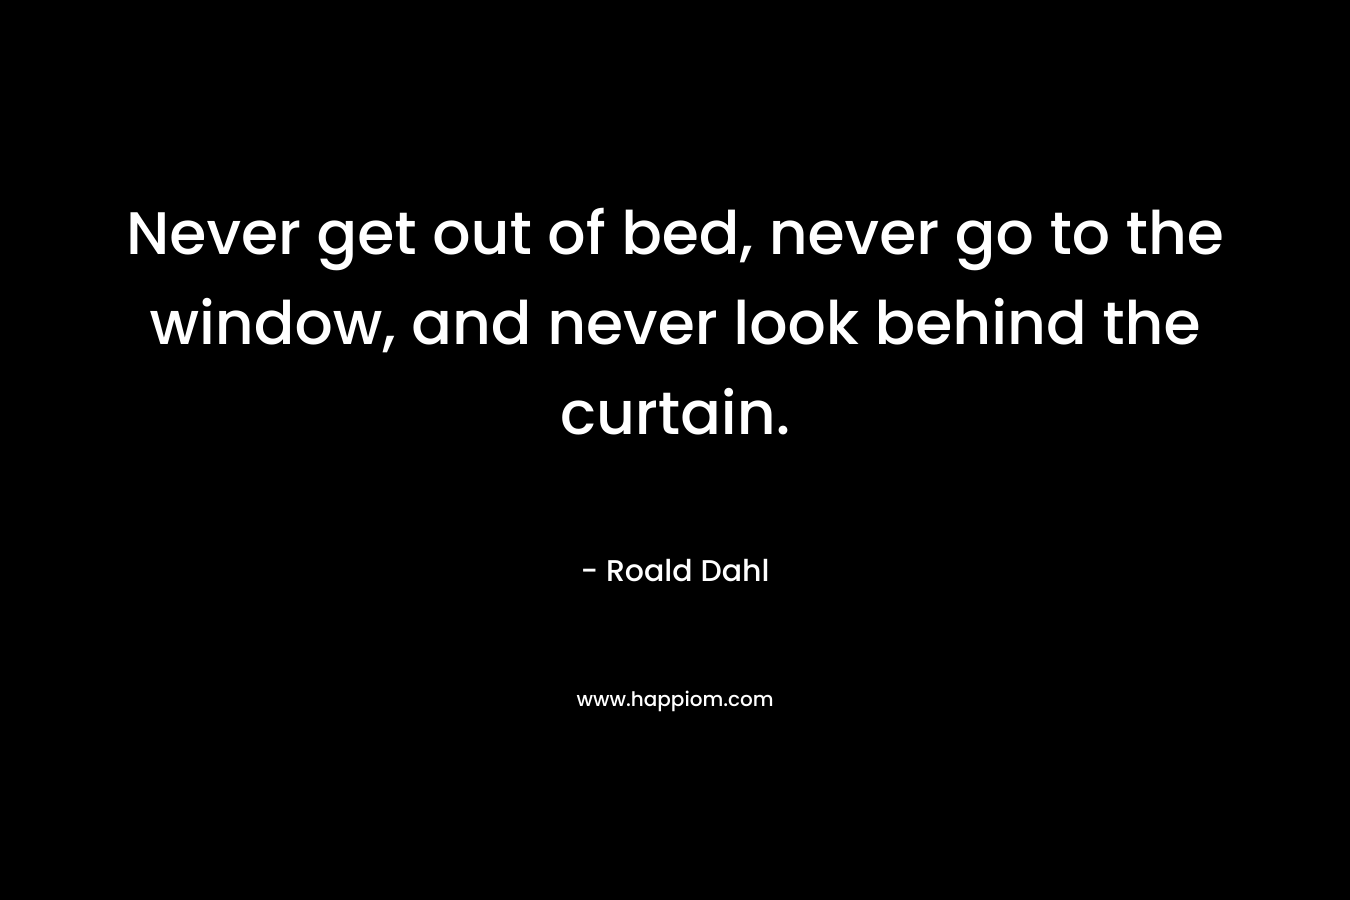 Never get out of bed, never go to the window, and never look behind the curtain. – Roald Dahl